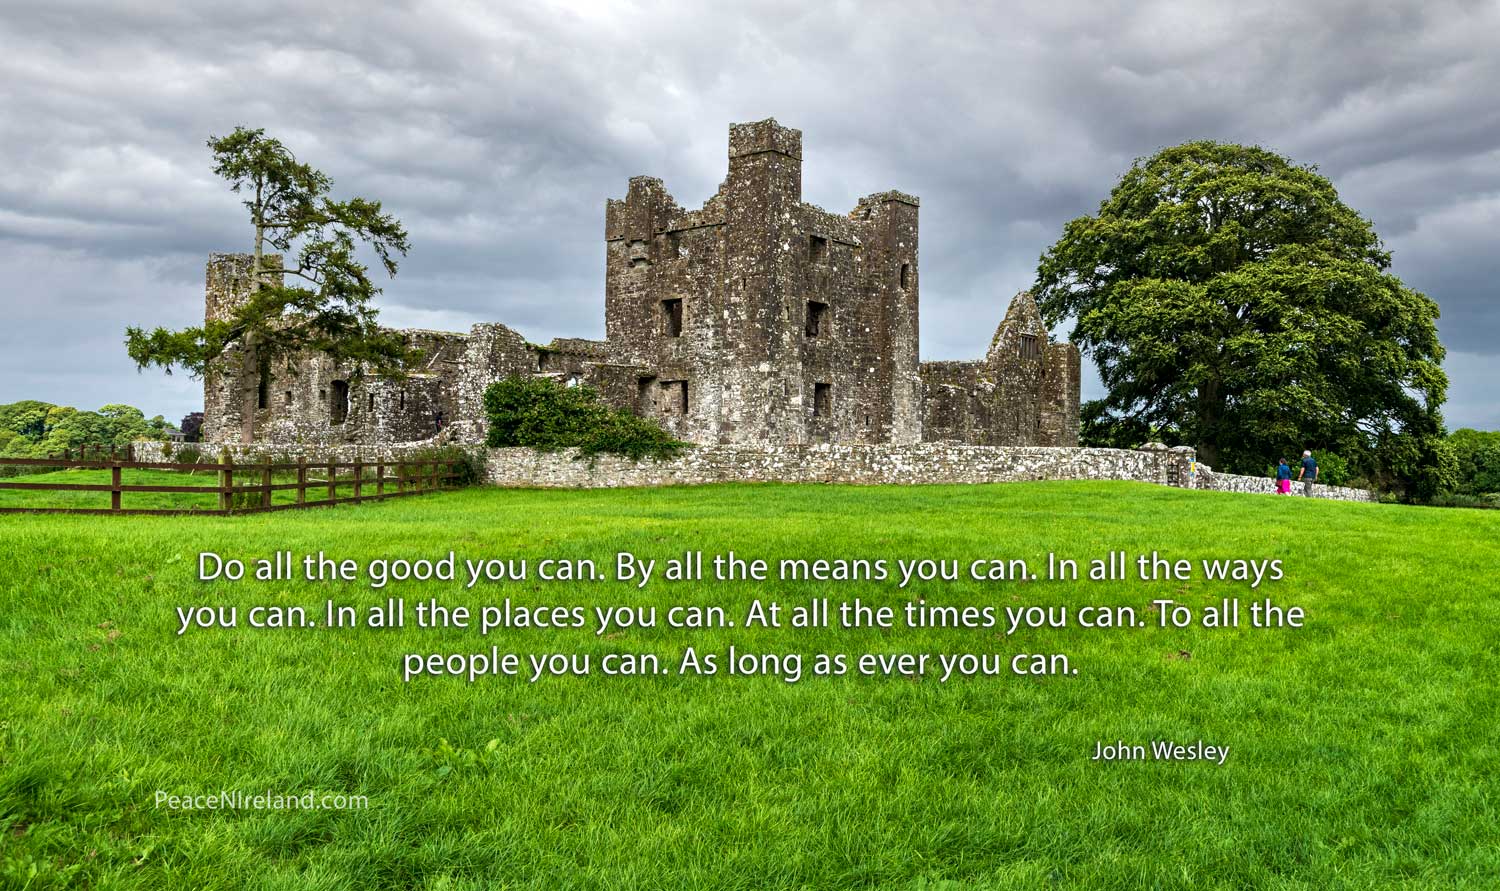 Bective Abbey – a Cistercian abbey on the River Boyne at Bective, County Meath, founded in 1147. The remaining (well-preserved) structure and ruins primarily date to the 15th century.